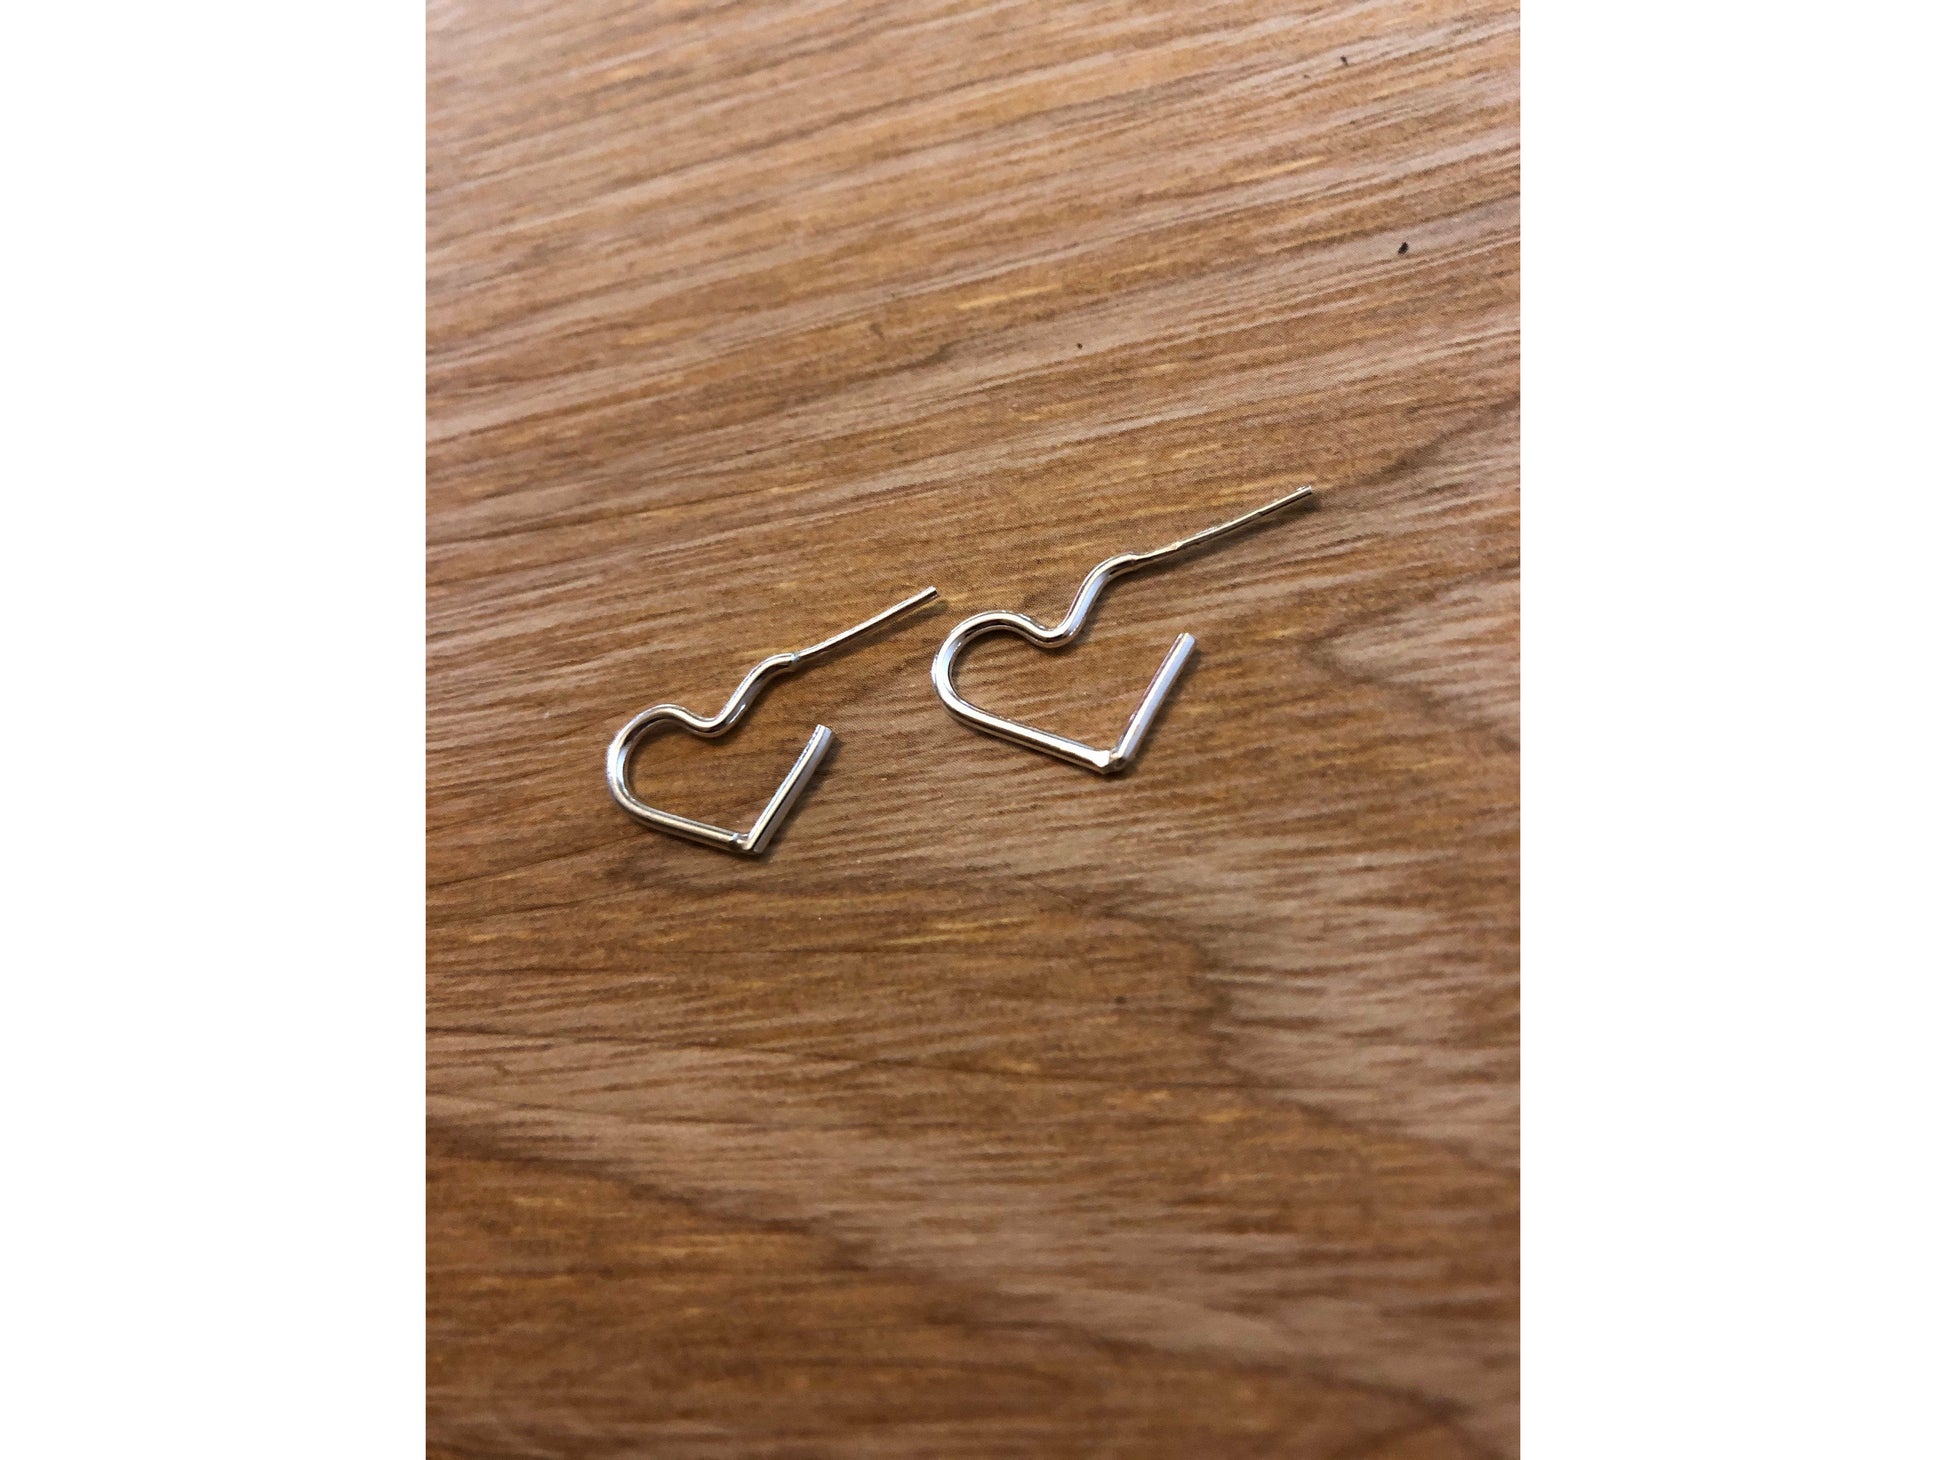 silver wire makes a heart shape